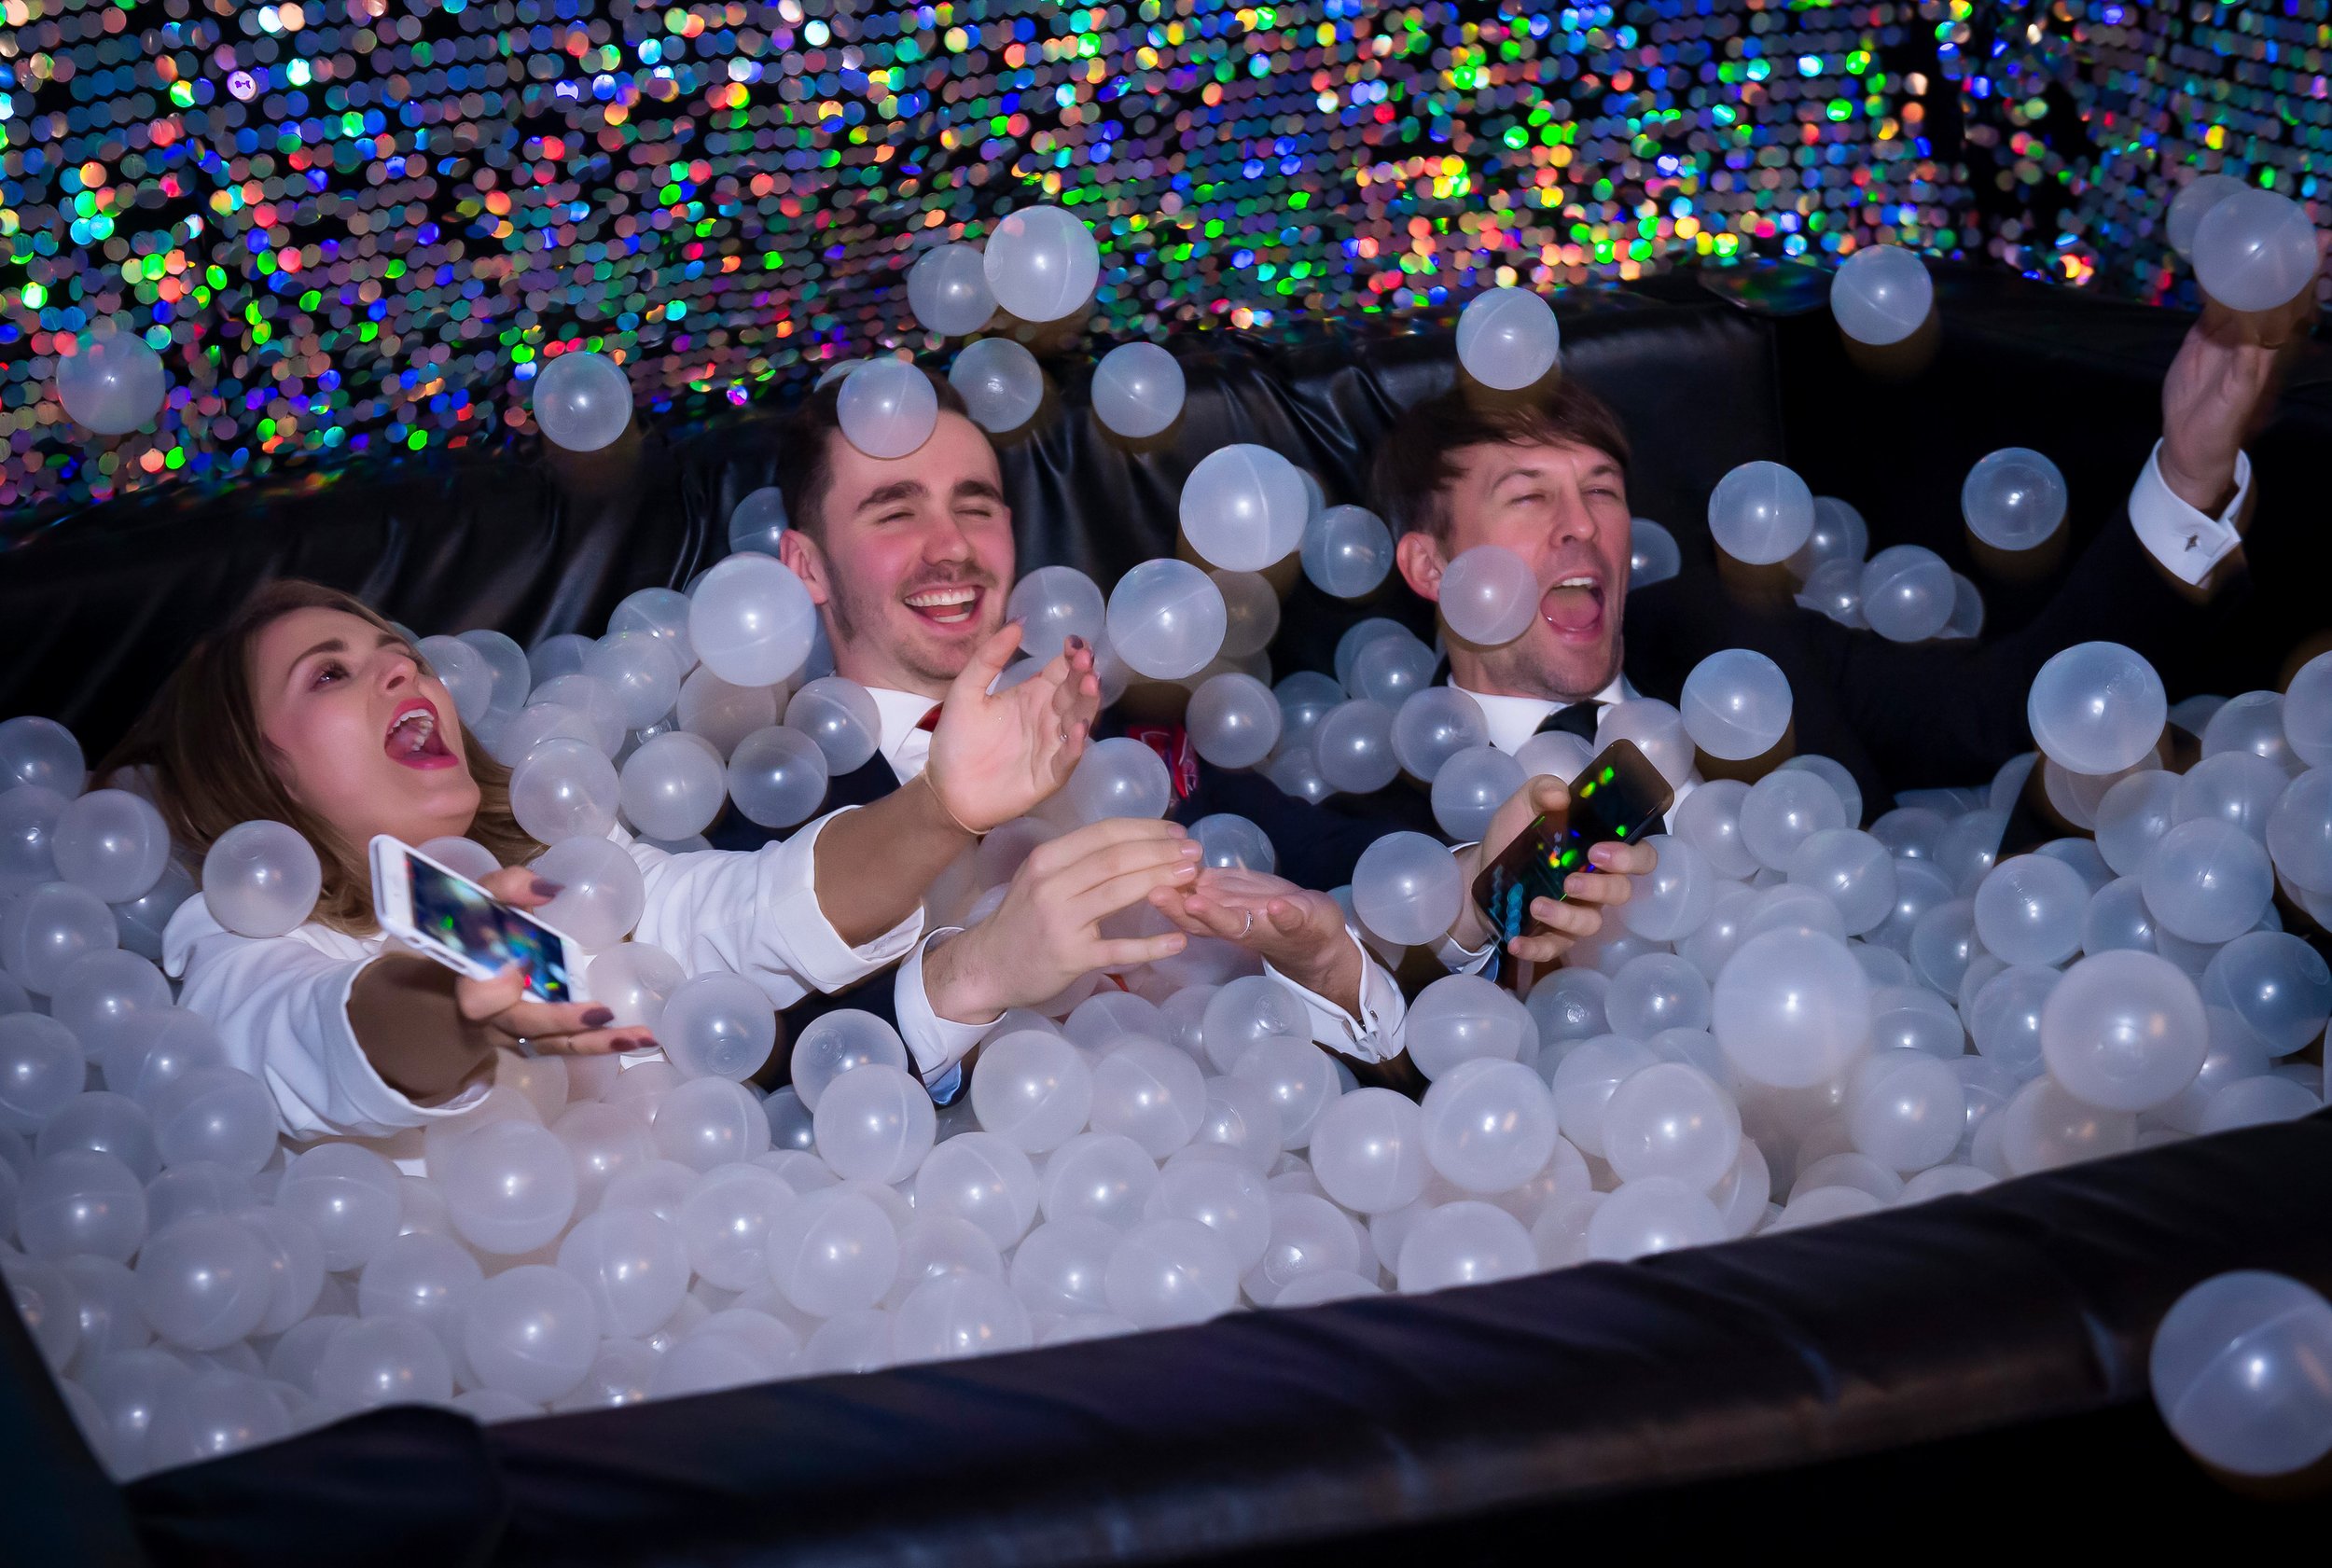 Giant Adult Ball Pit